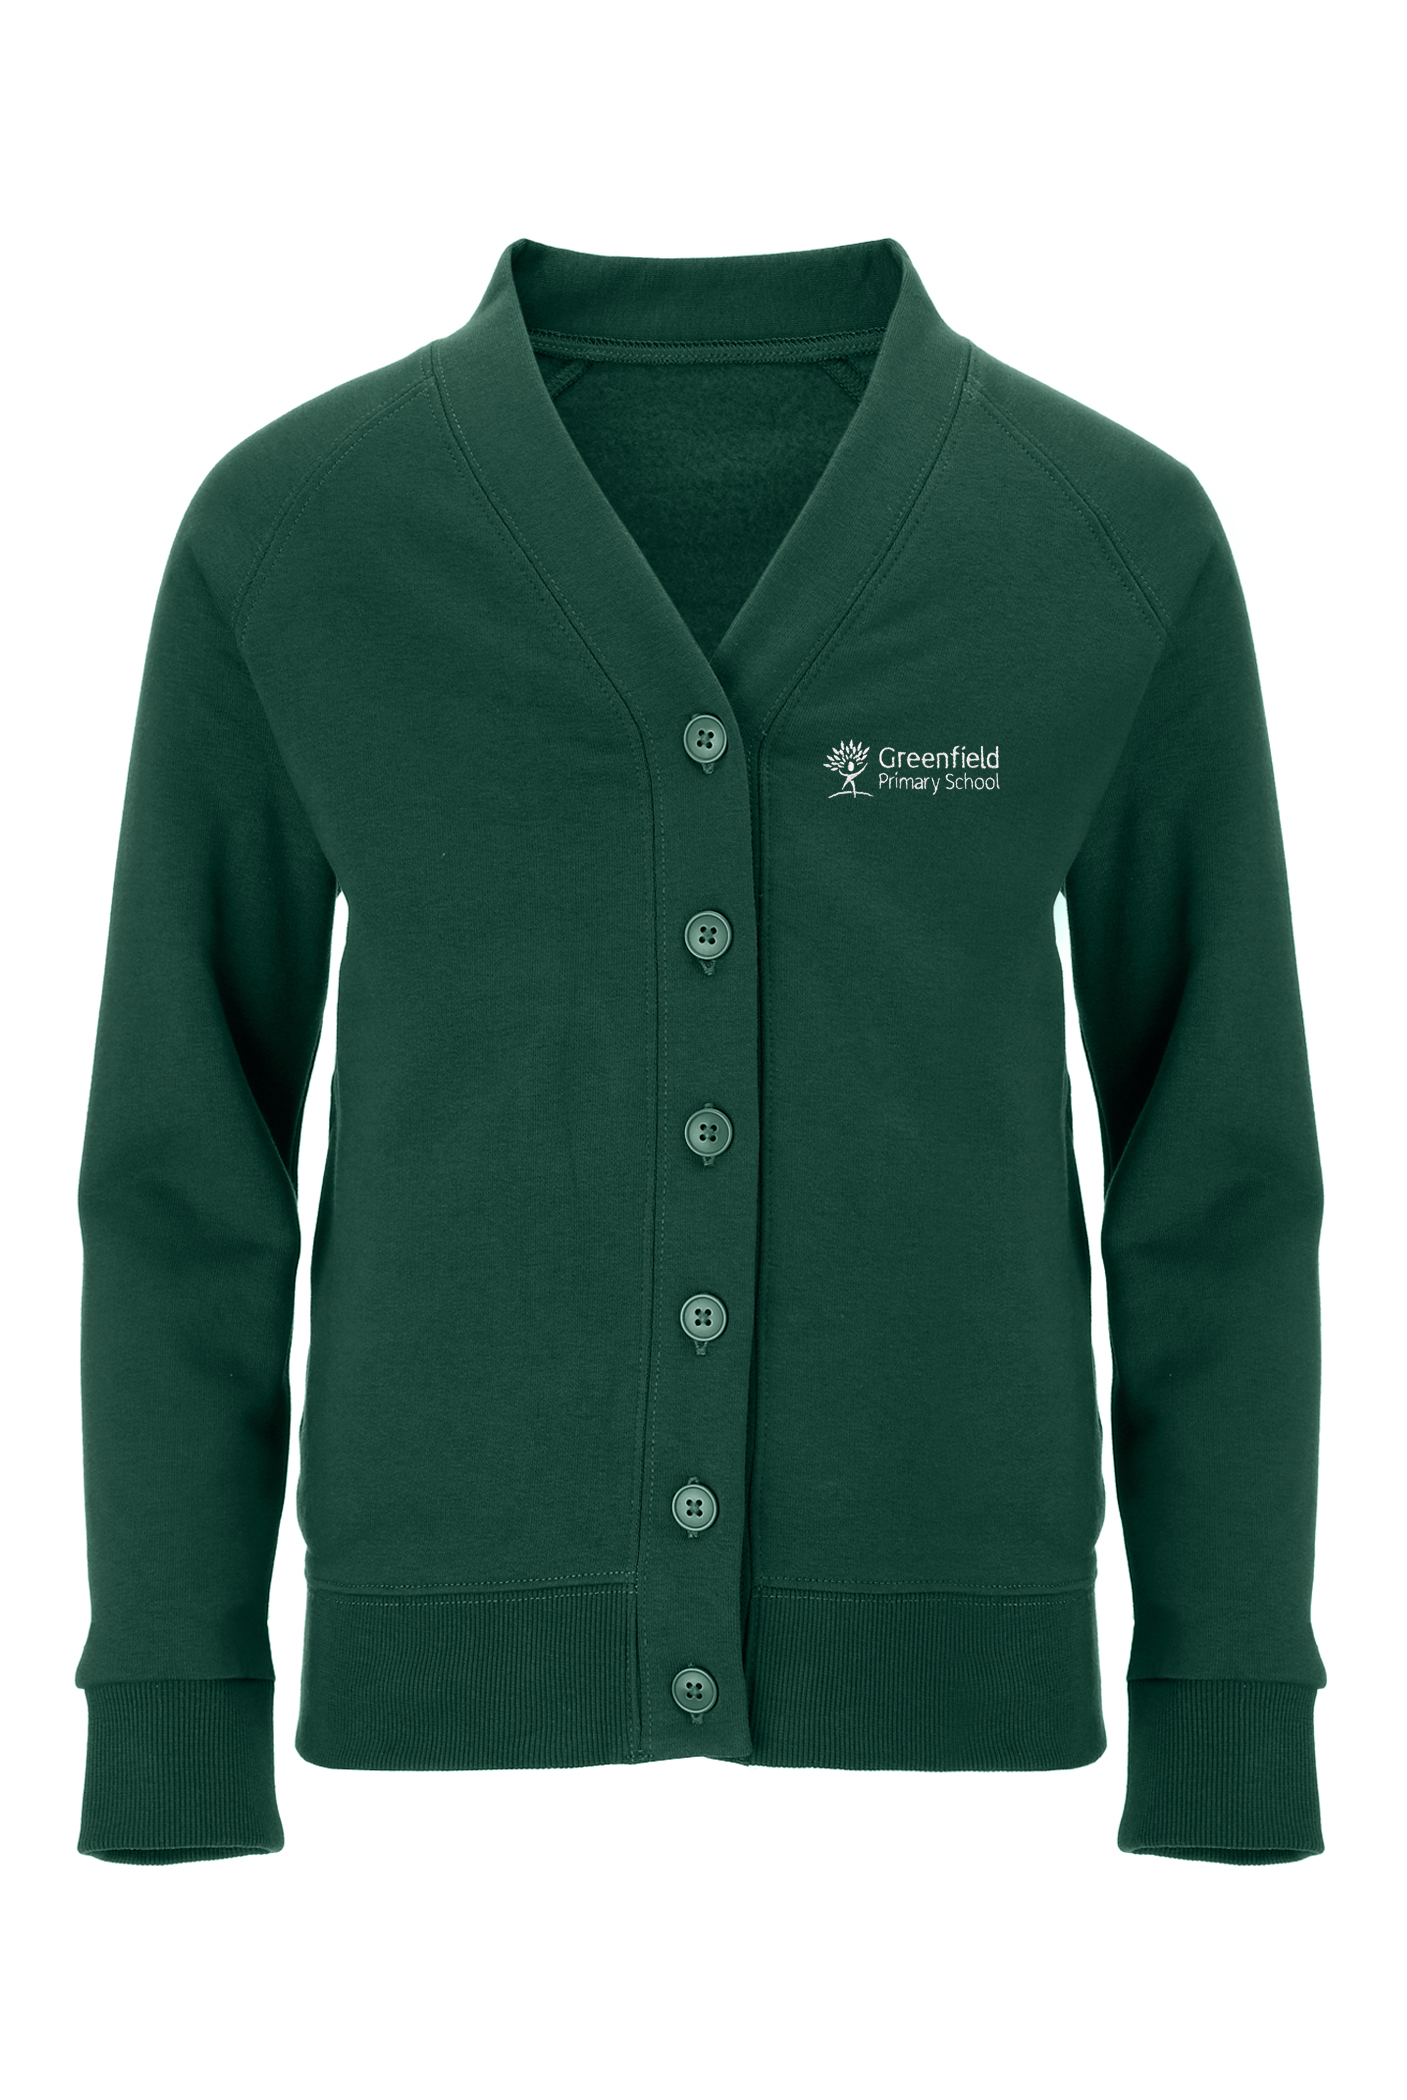 Greenfield Primary School Girls Embroidered Sweat Cardigan